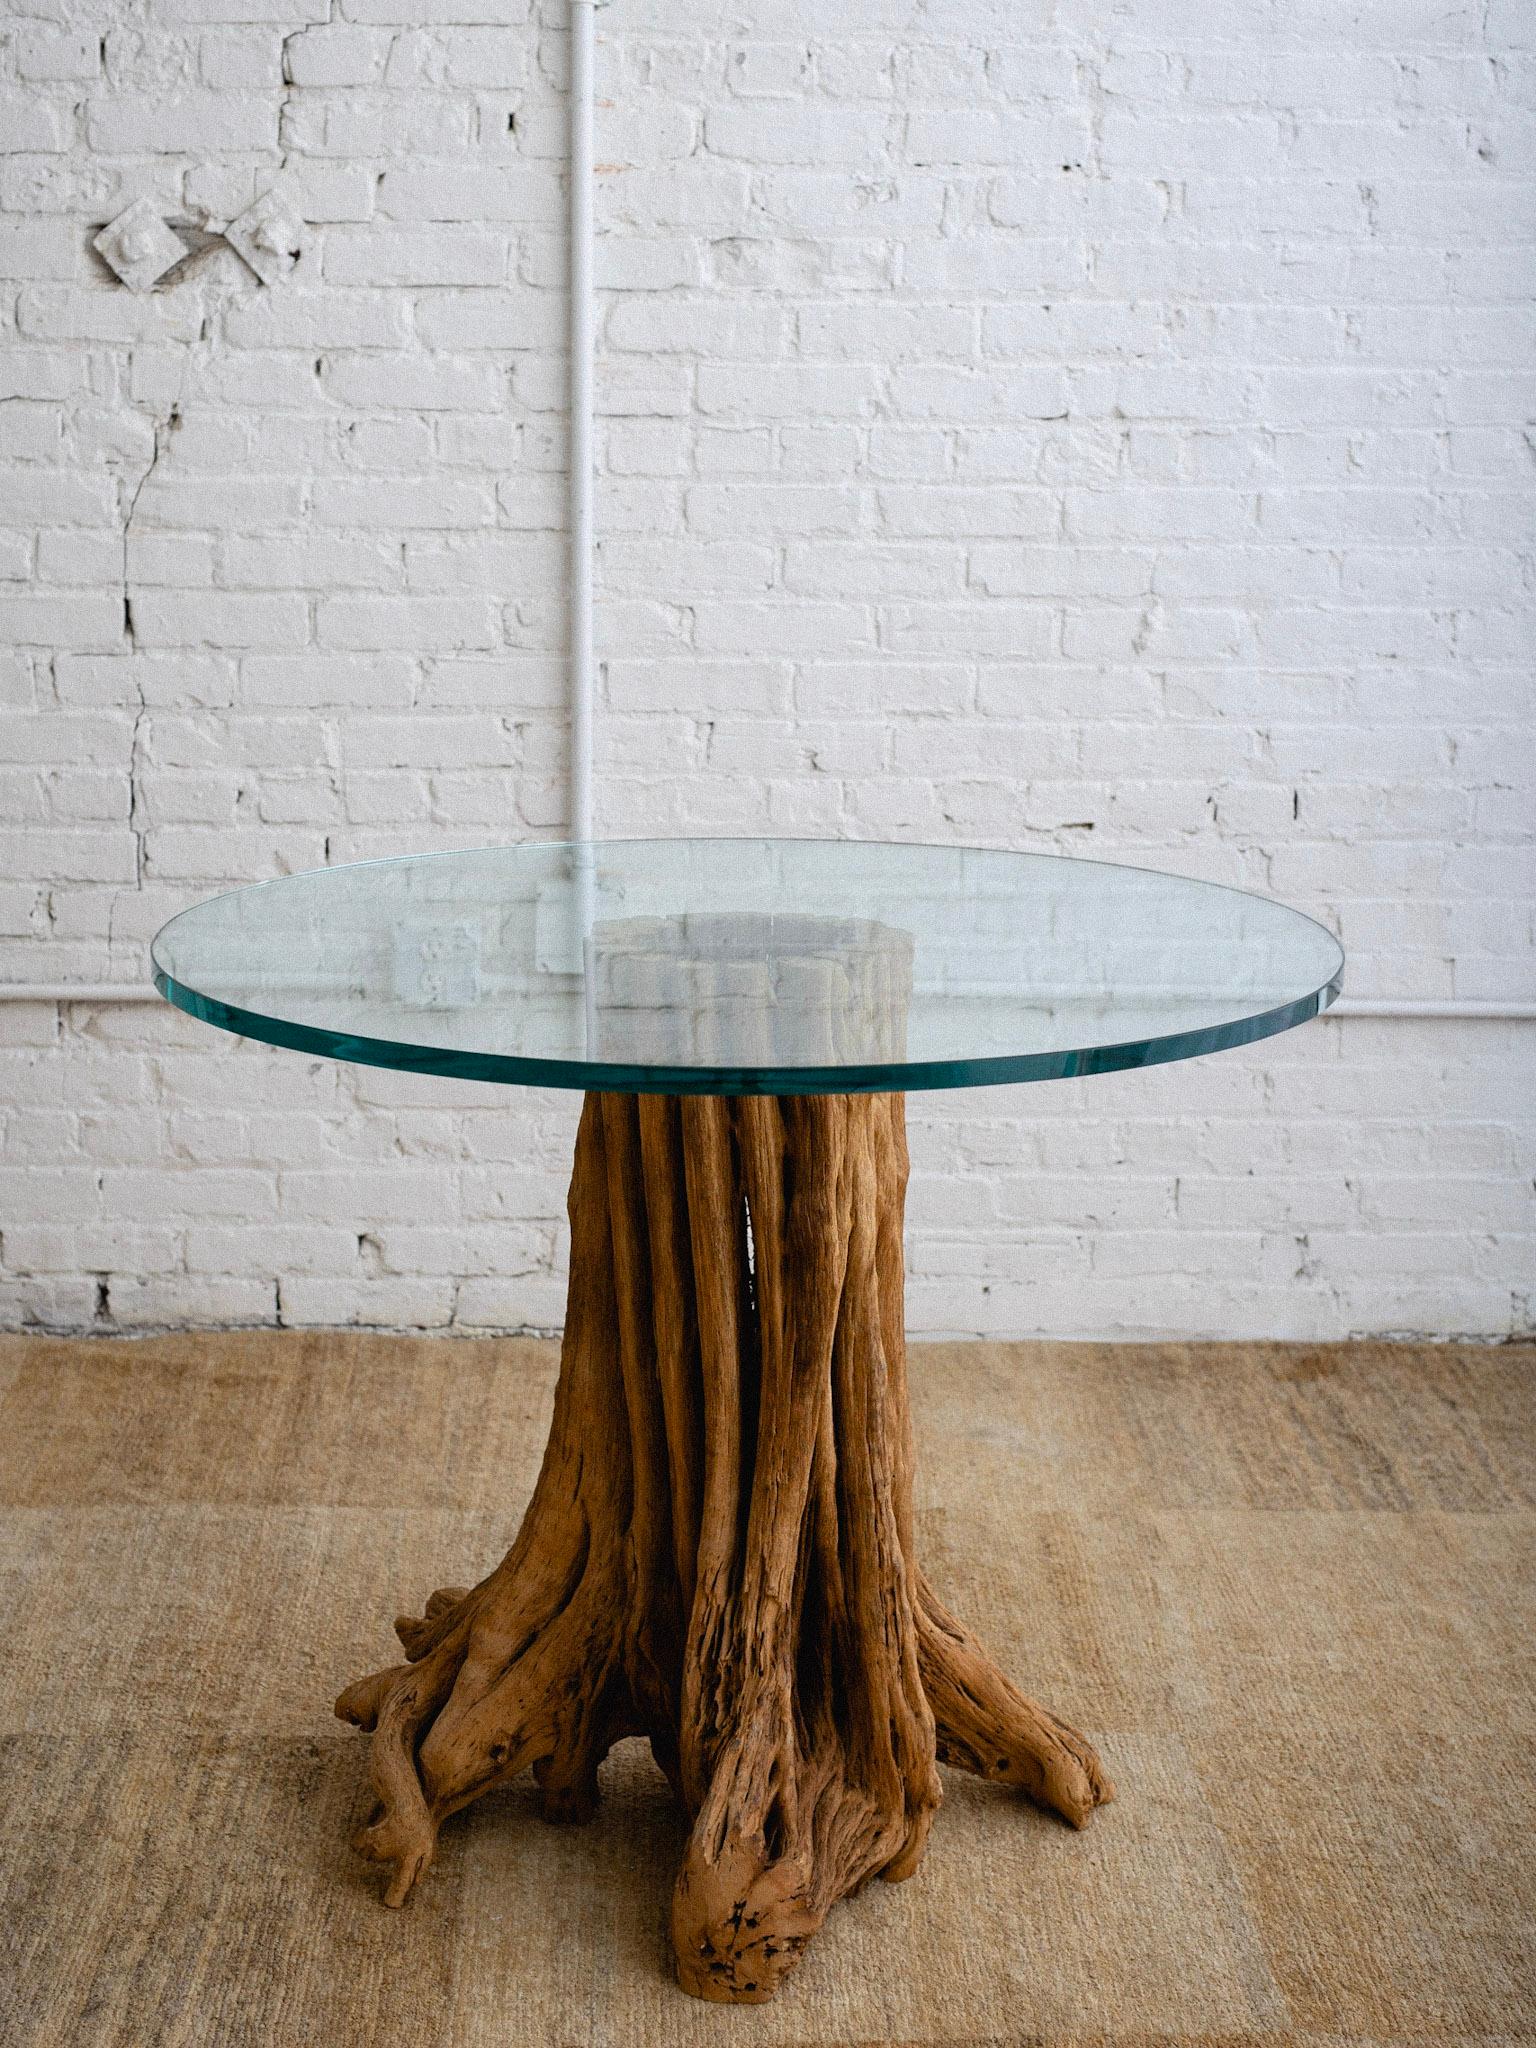 A vintage saguaro cactus dining table. A solid wood pedestal crafted from the lower portion of a saguaro cactus “skeleton.